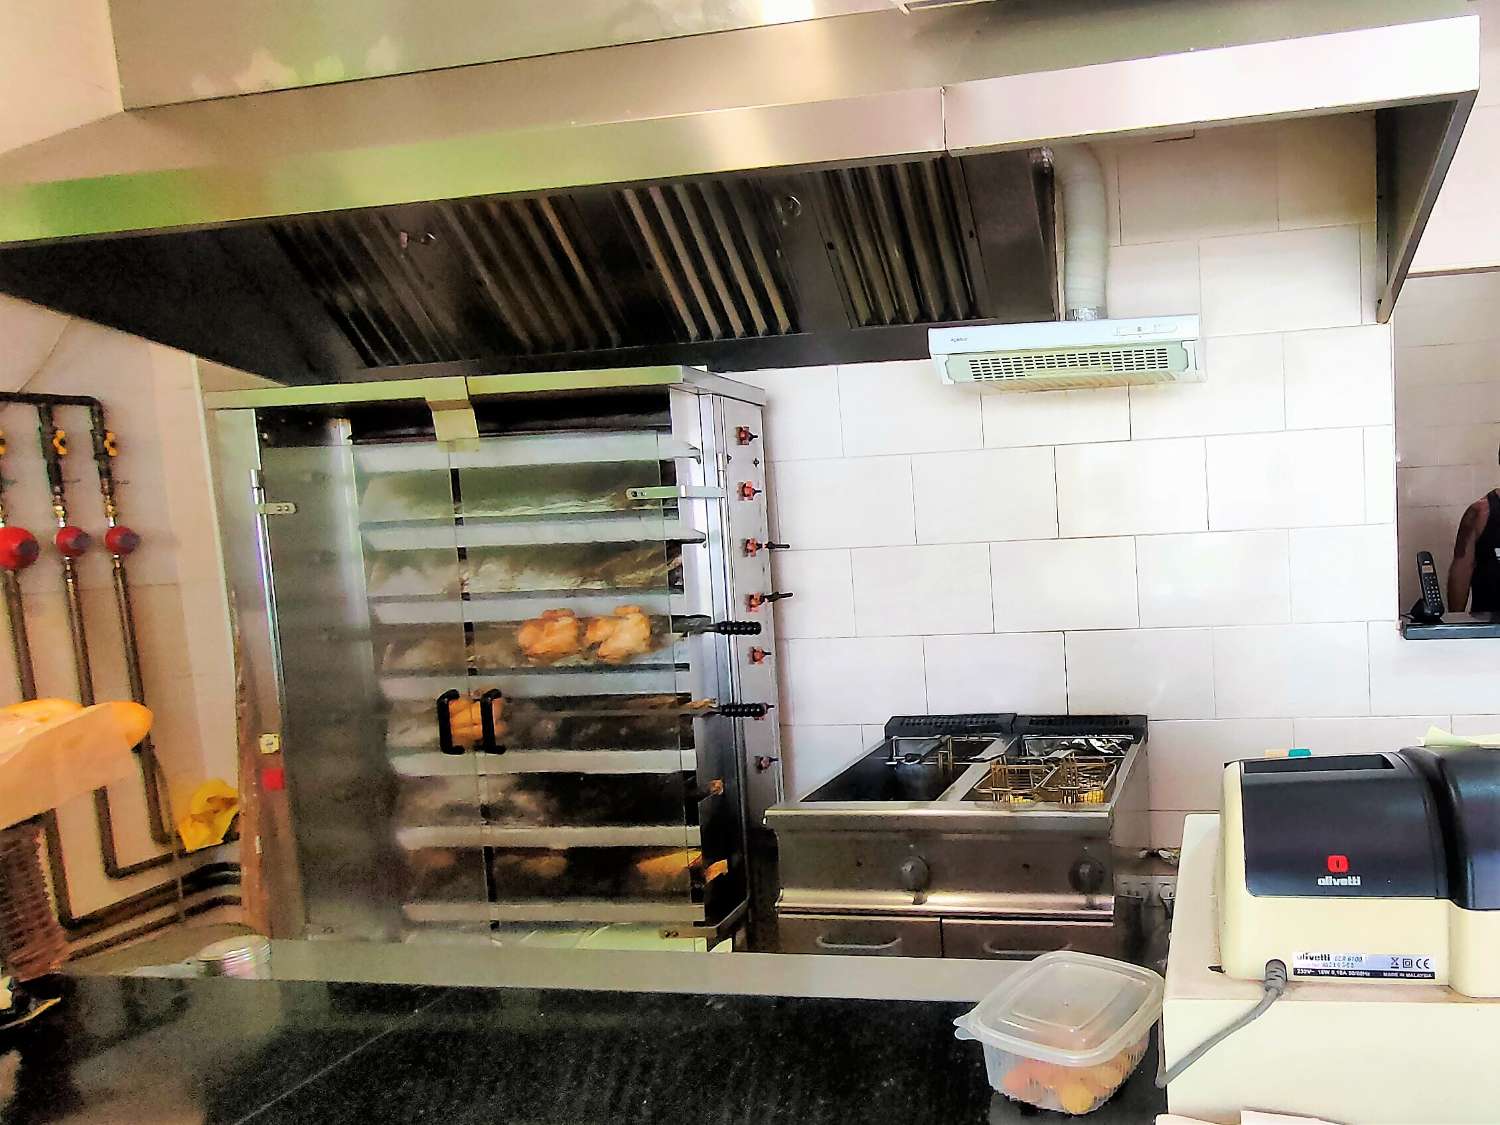 Takeaway Business for Sale in Benalmadena - Ideal FISH&CHIPS - ROASTED CHICKENS & PIZZA